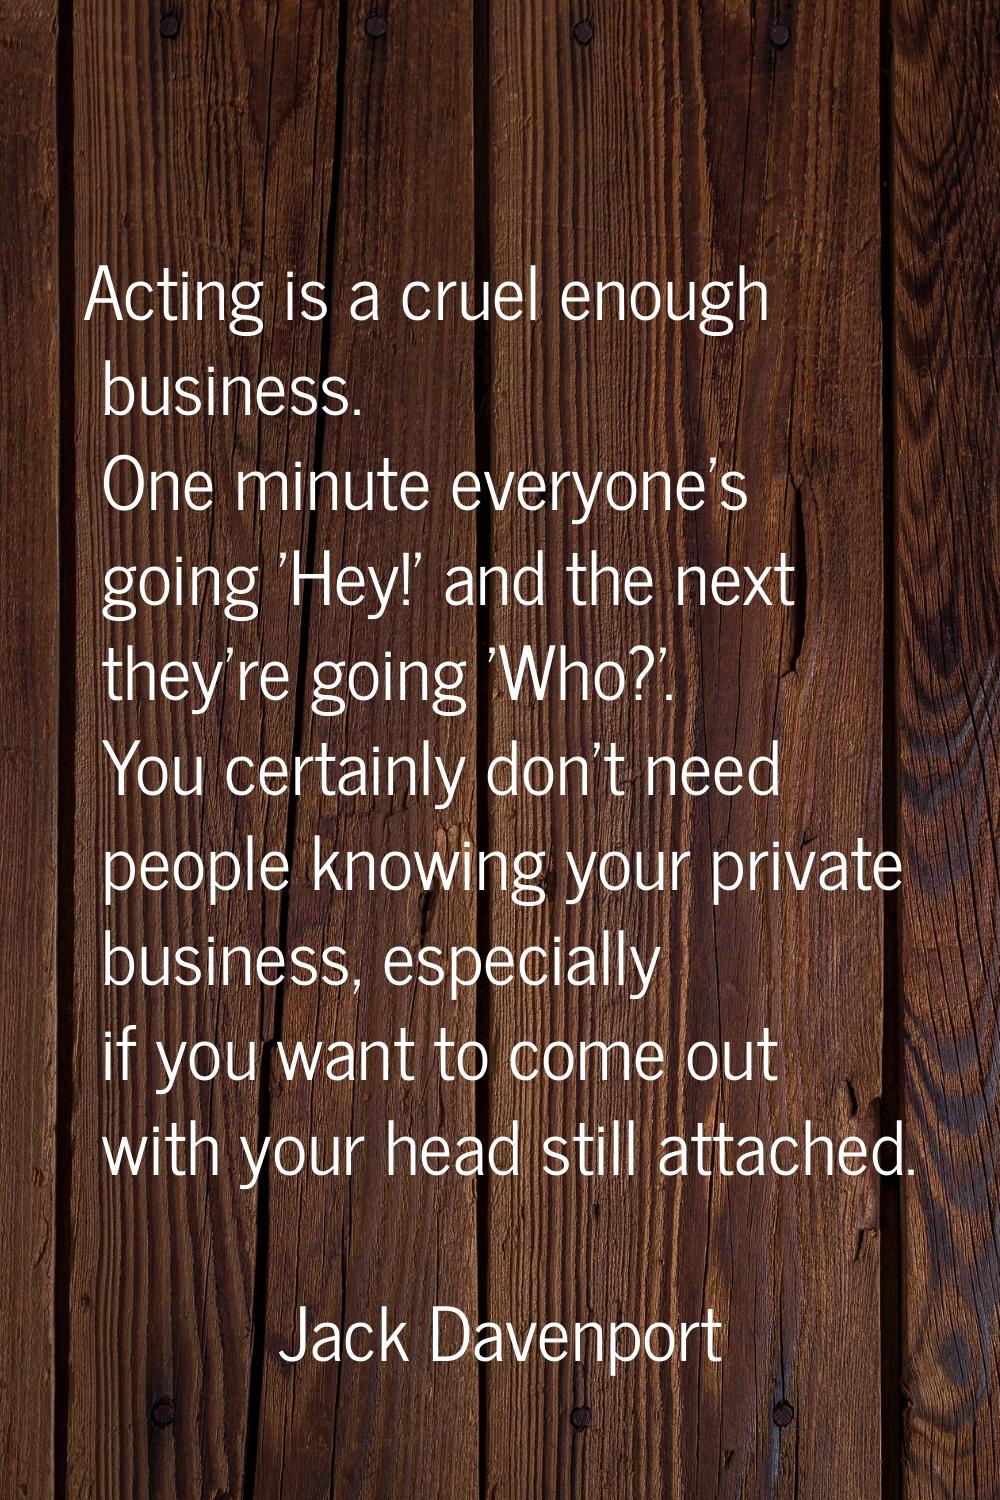 Acting is a cruel enough business. One minute everyone's going 'Hey!' and the next they're going 'W